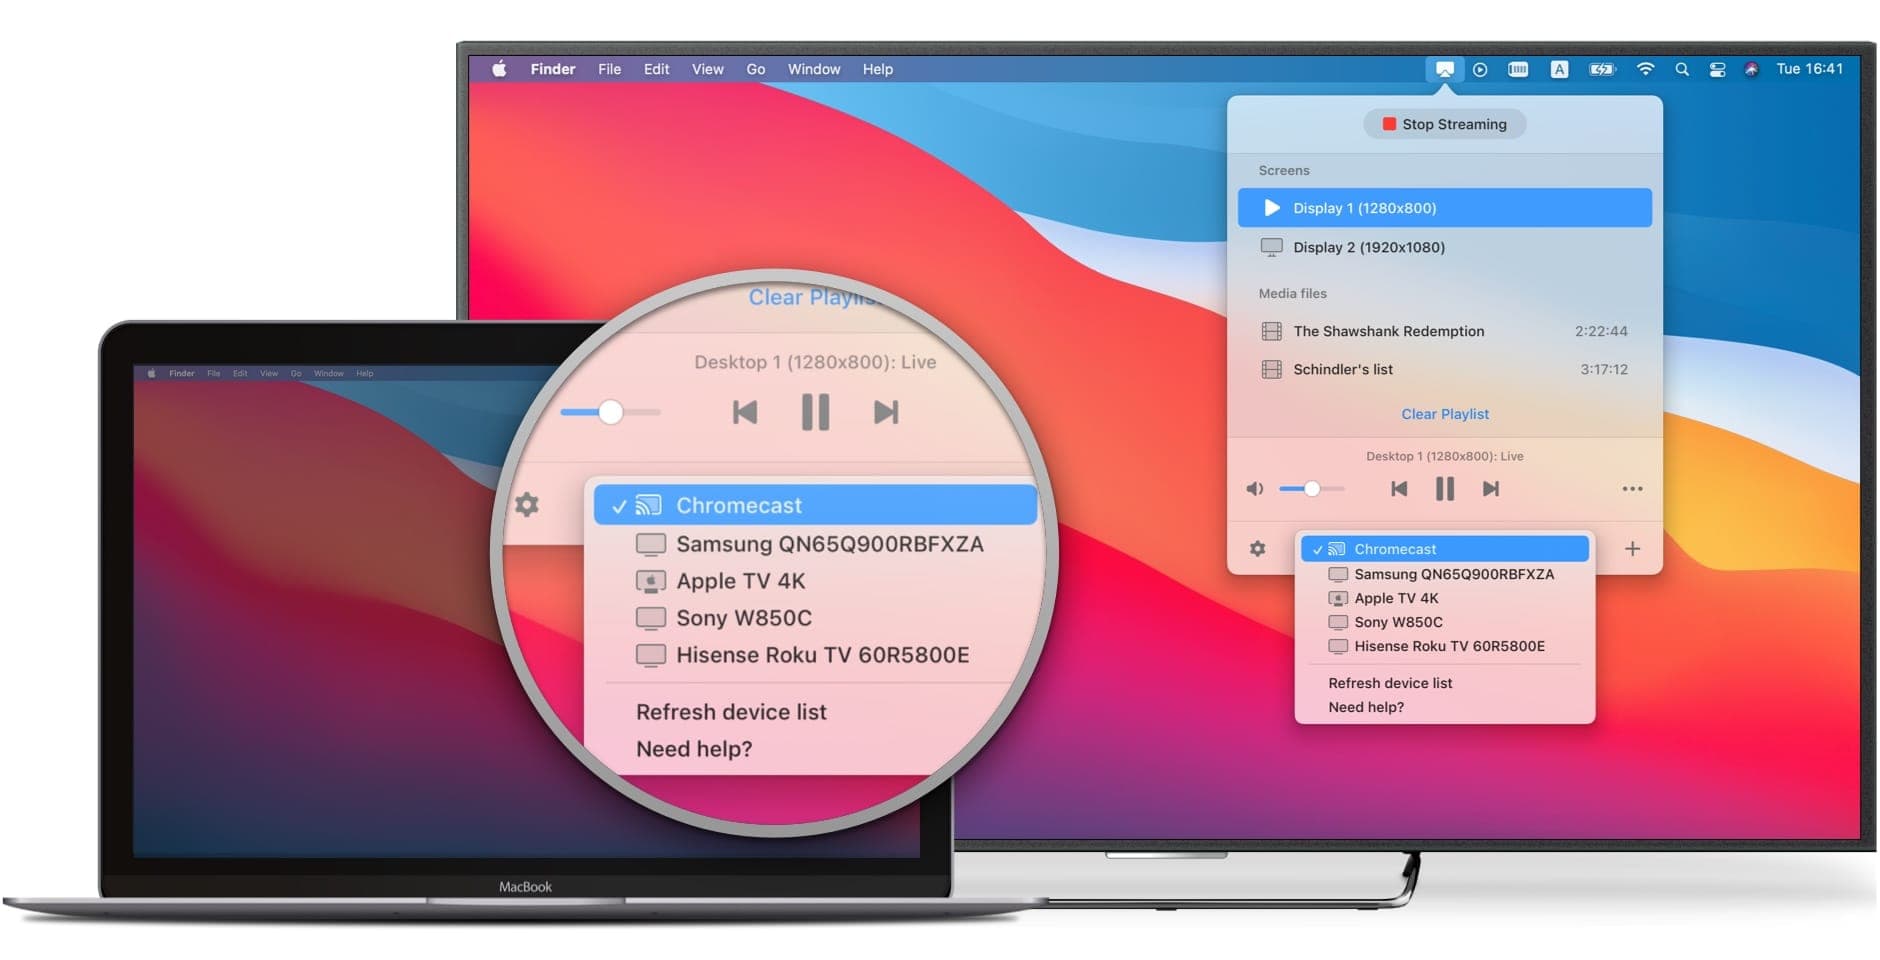 Screen Mirroring Mac To Sony Tv Made Easy, Can You Mirror Apple Tv With Macbook